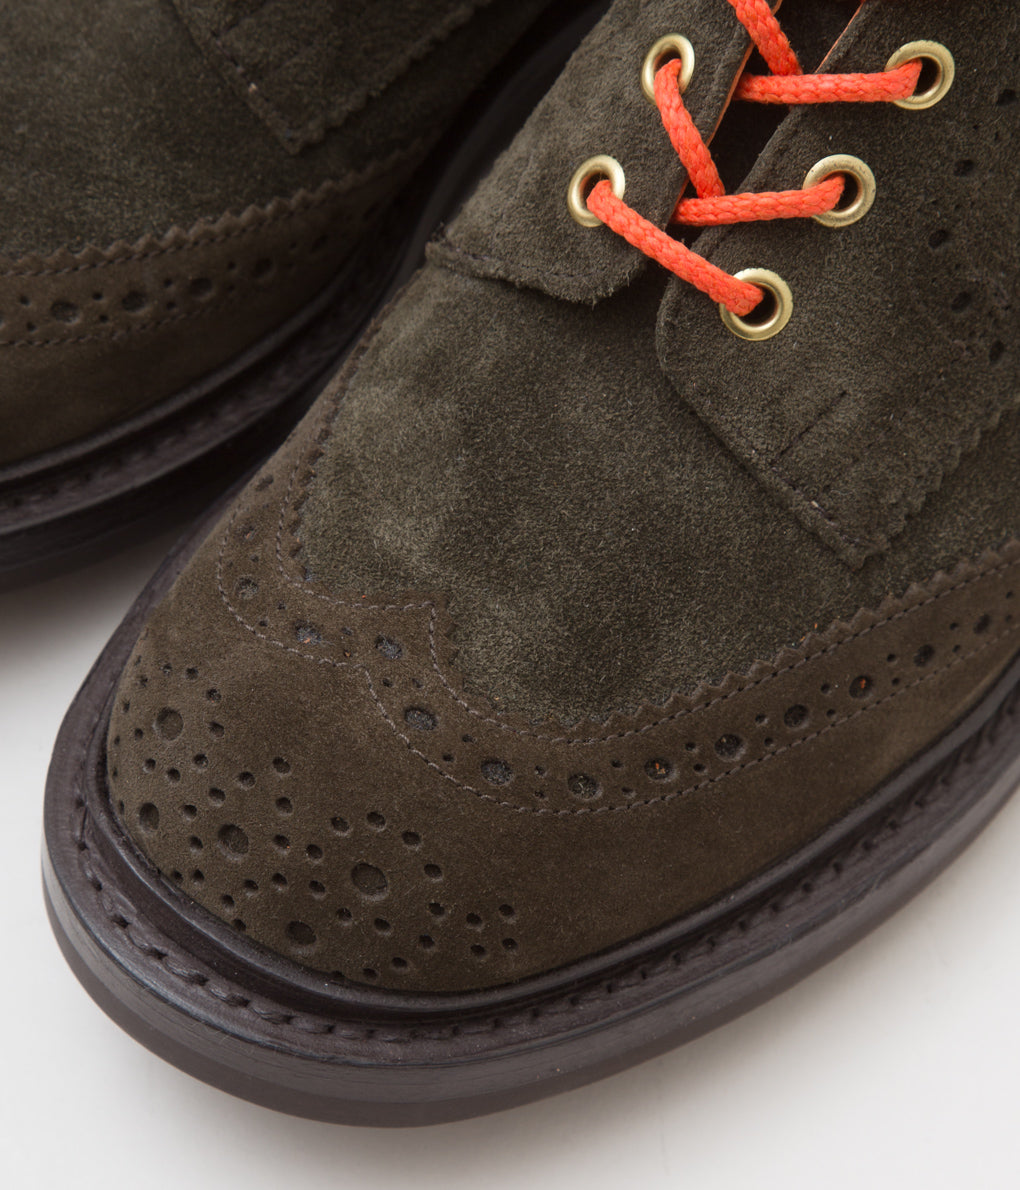 QUILP BY TRICKER'S×MAIDENS SHOP "M7495 BROGUE BOOTS"(DK OLIVE MULTI)